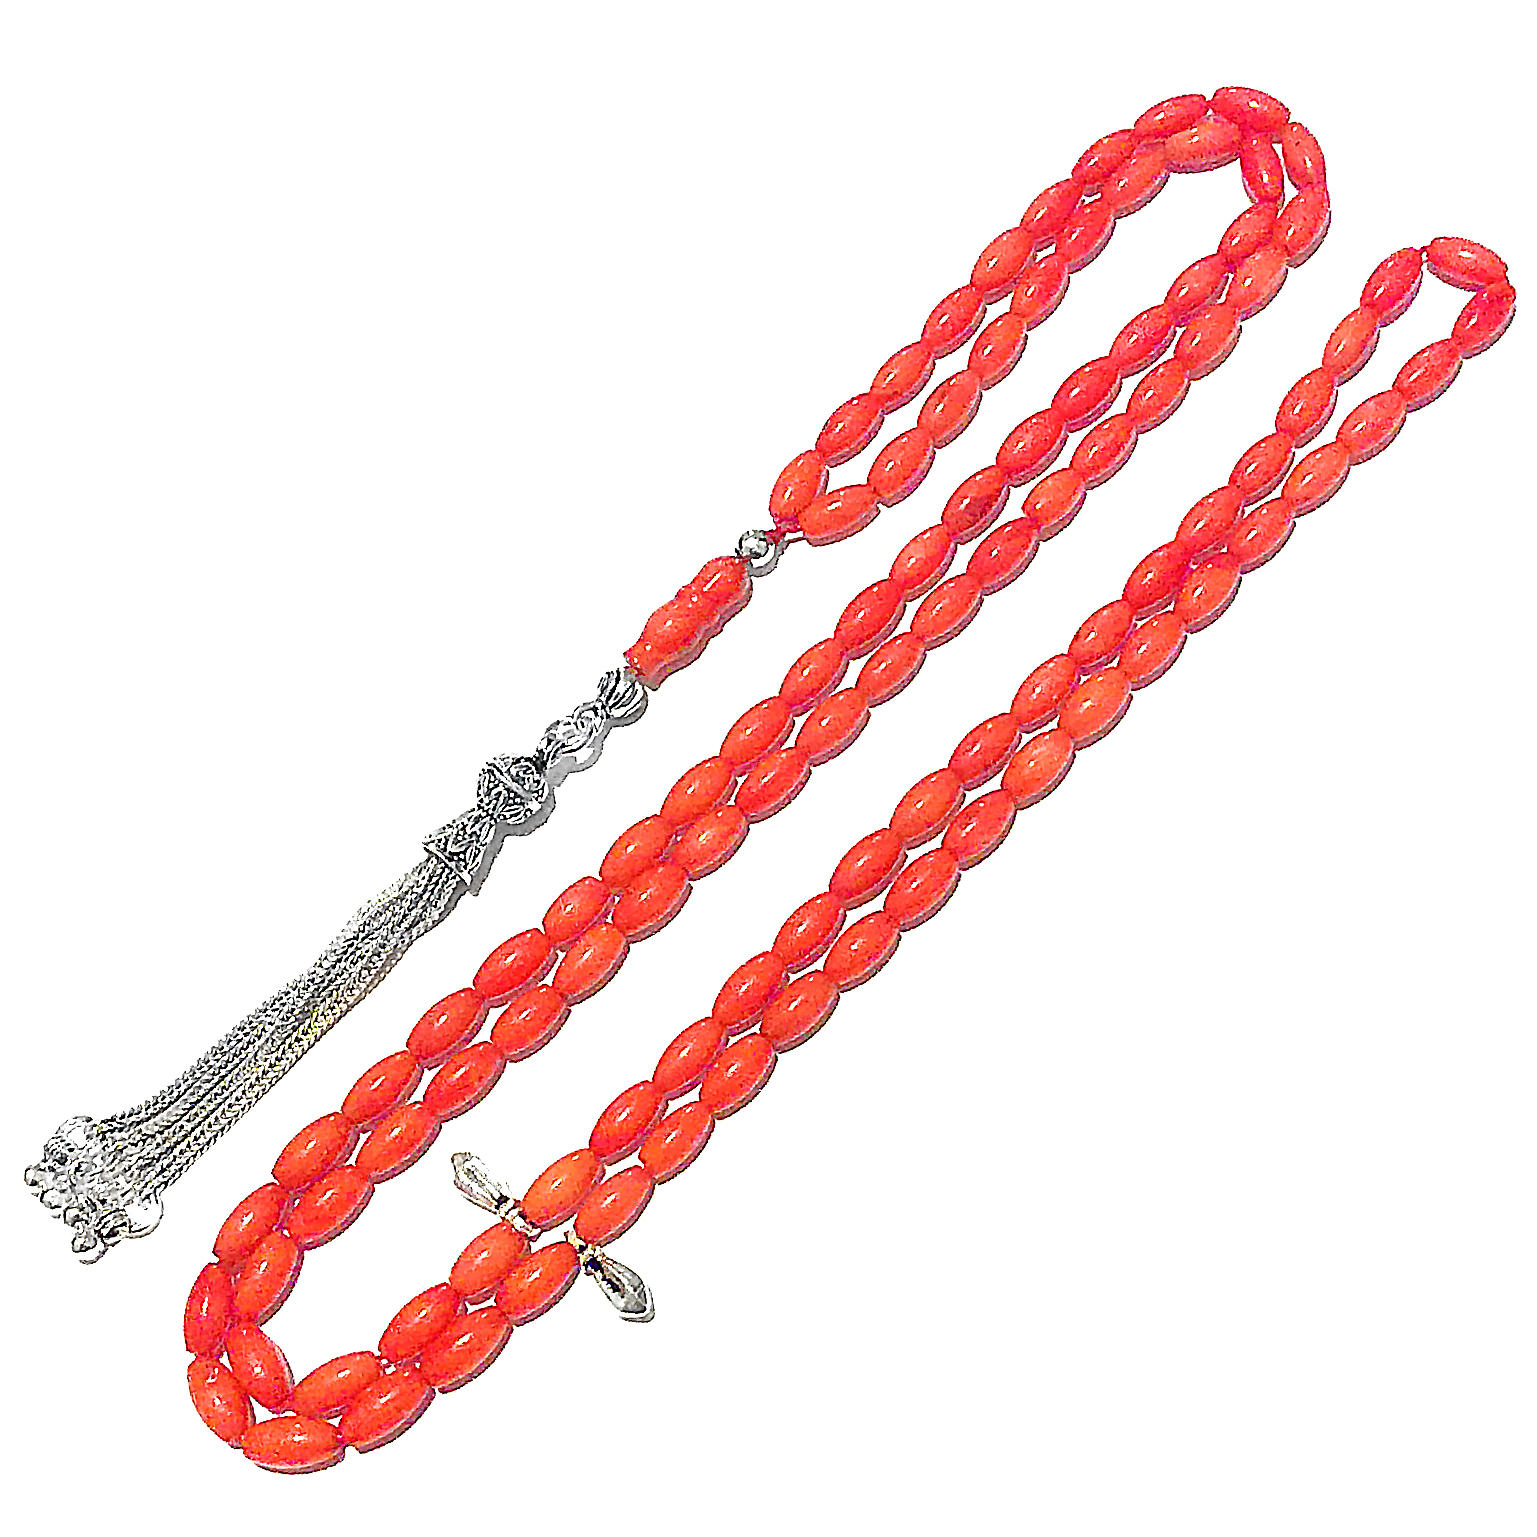 Islamic prayer beads 99 tasbih red coral sterling silver ID # 6792 - Click Image to Close